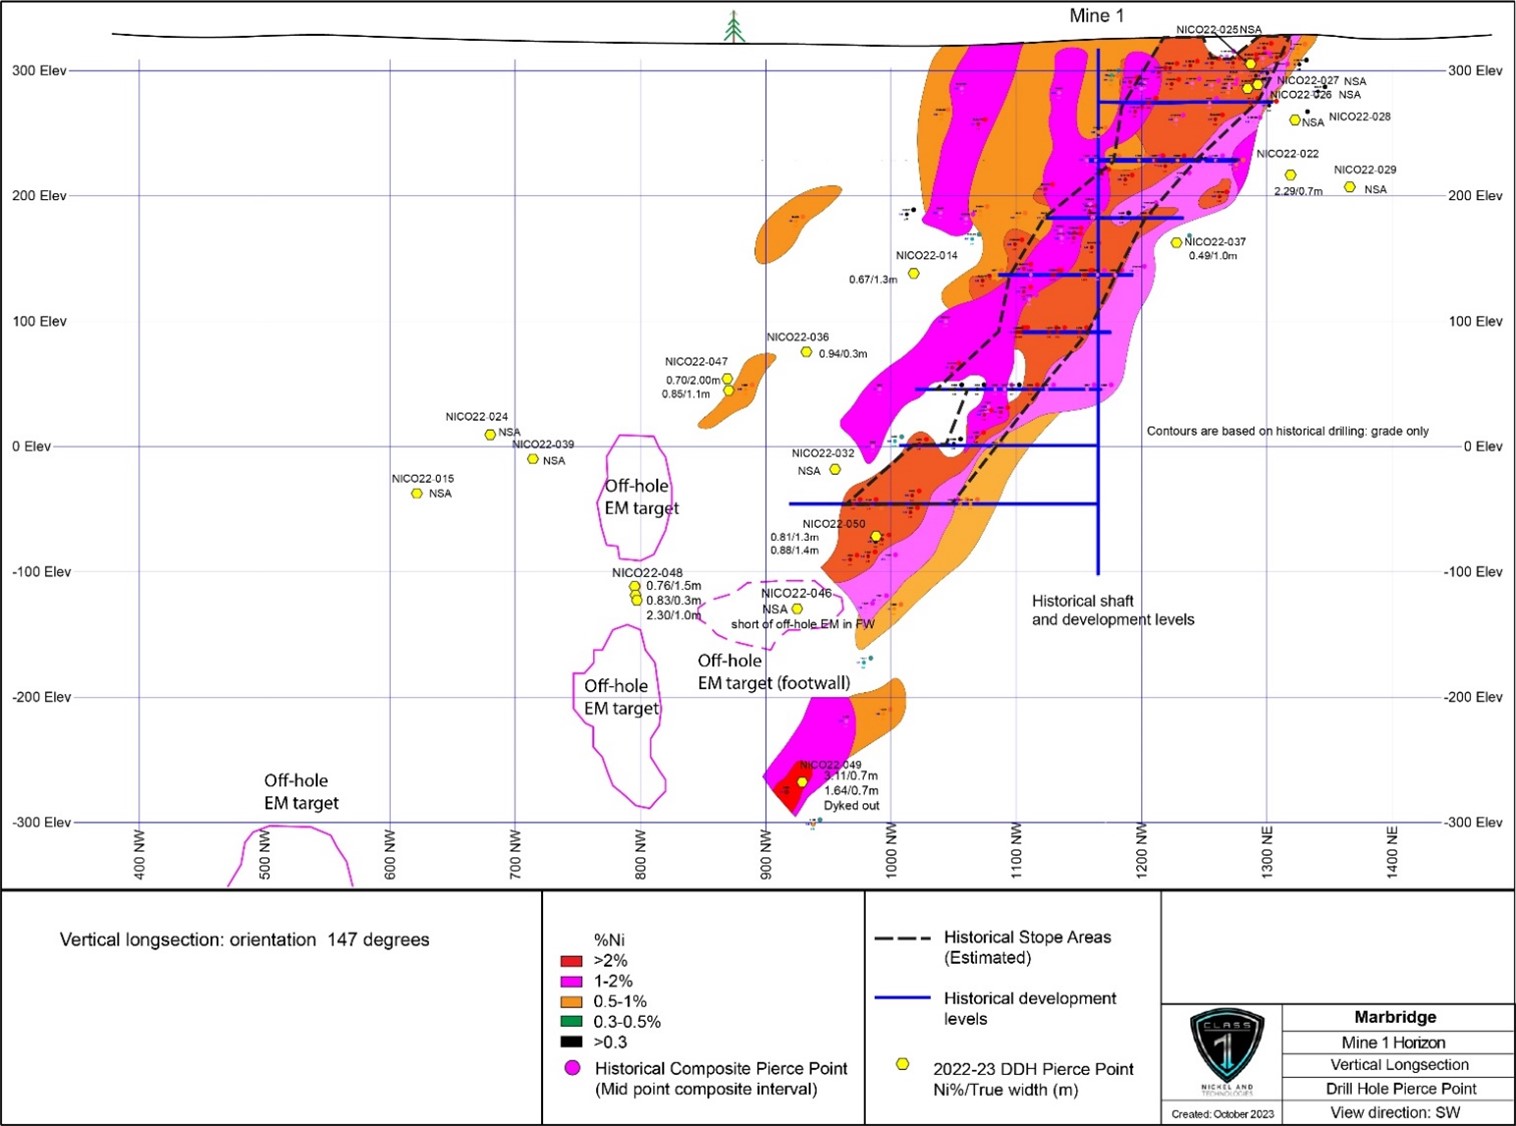 Vertical long-section of the Mine 1 Horizon (147Az - looking southwest) with 2022 drill hole pierce points (Ni%/true width) and the location of the 4 untested off-hole BHEM targets (